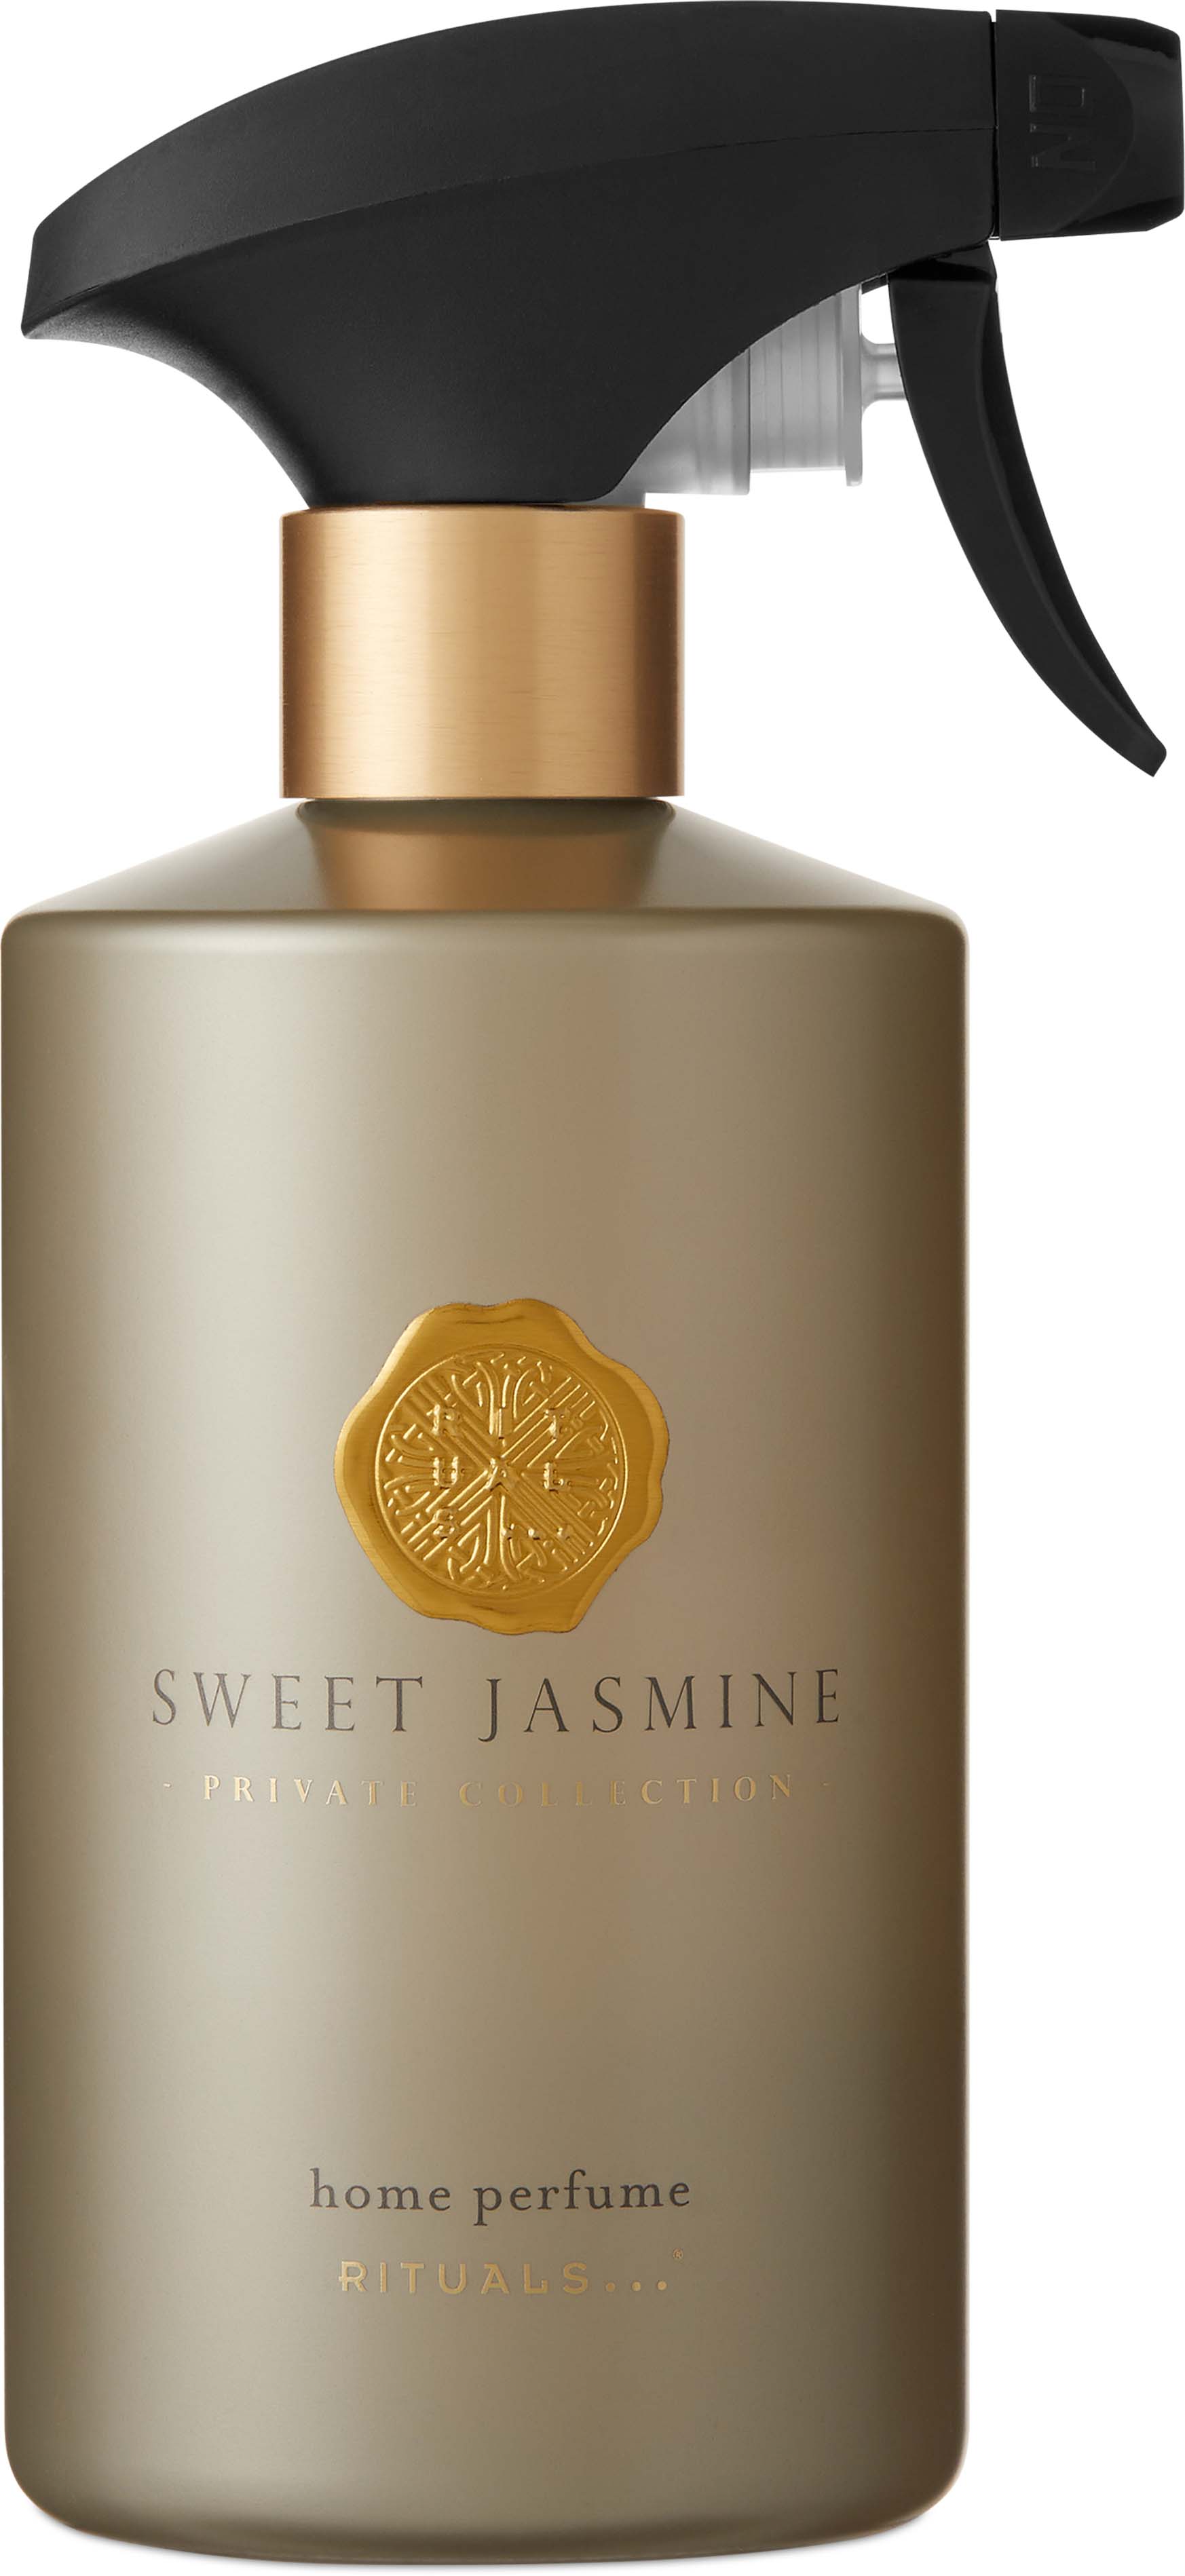 Rituals Private Collection Home Perfume Spray - Sweet Jasmine 500ml/16.9oz